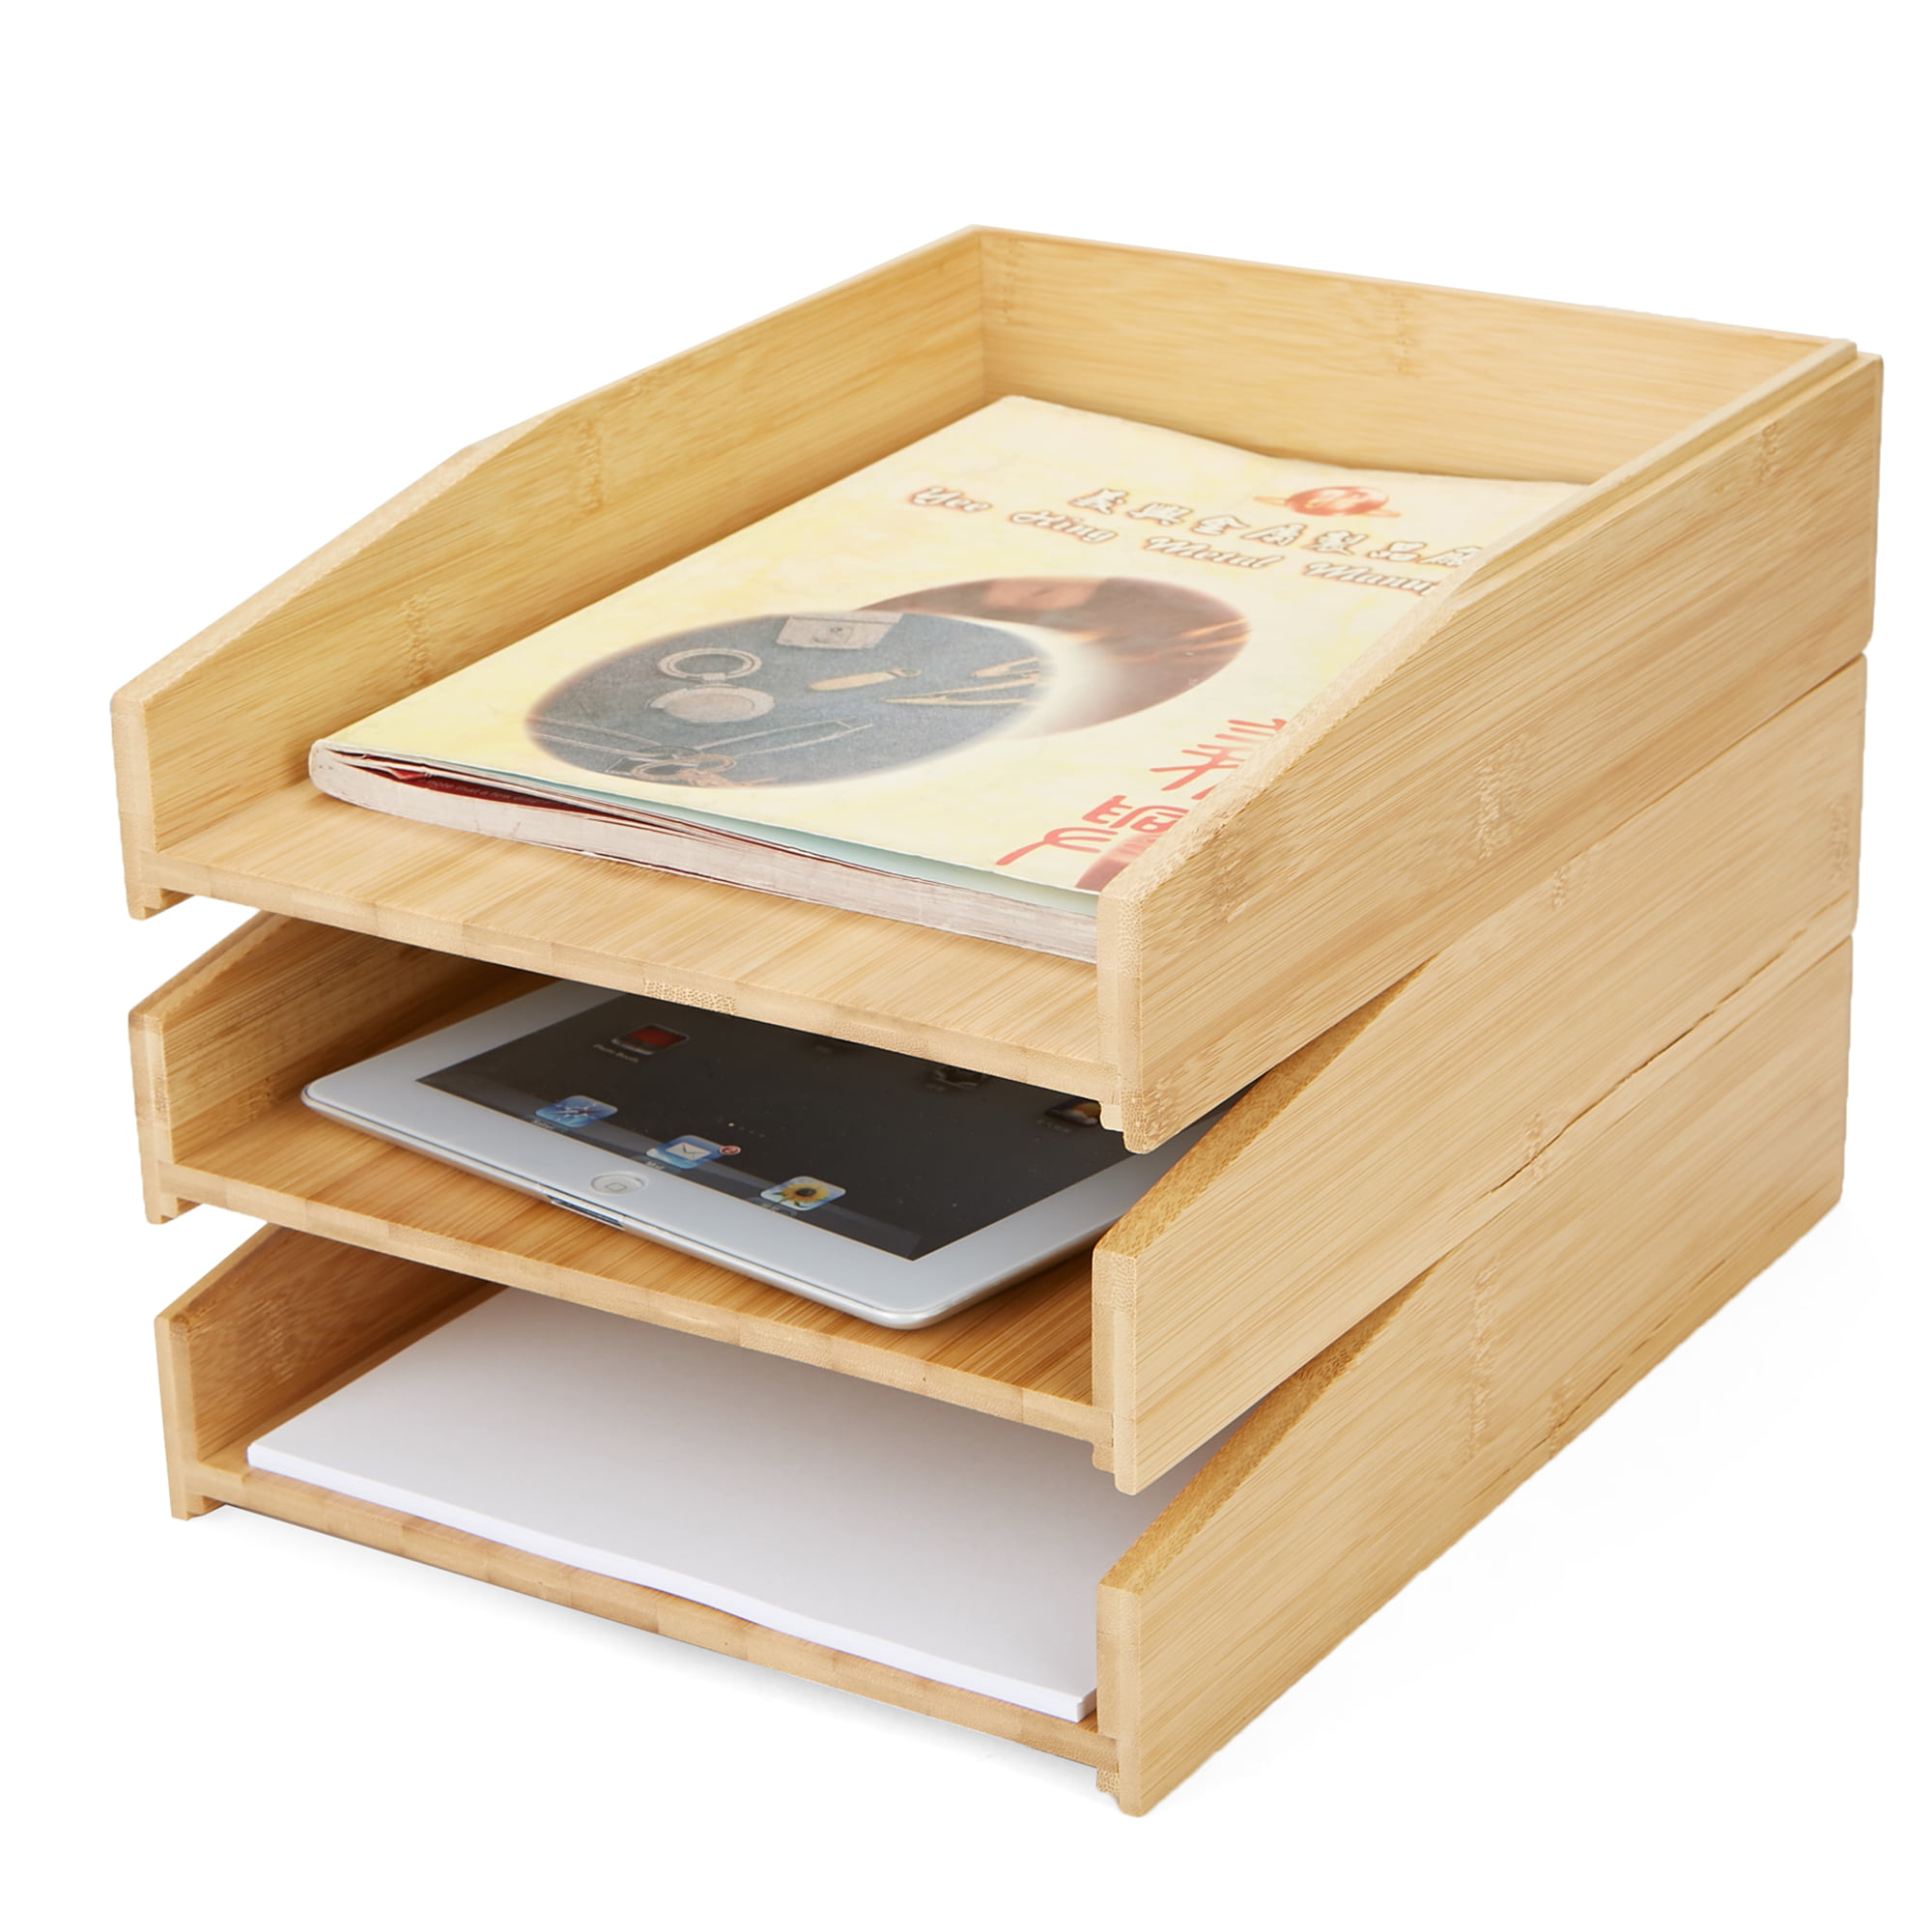 Prosumers Choice Bamboo Telephone Stand and Desk Organizer with Pull-Out Paper Tray for Home and Office